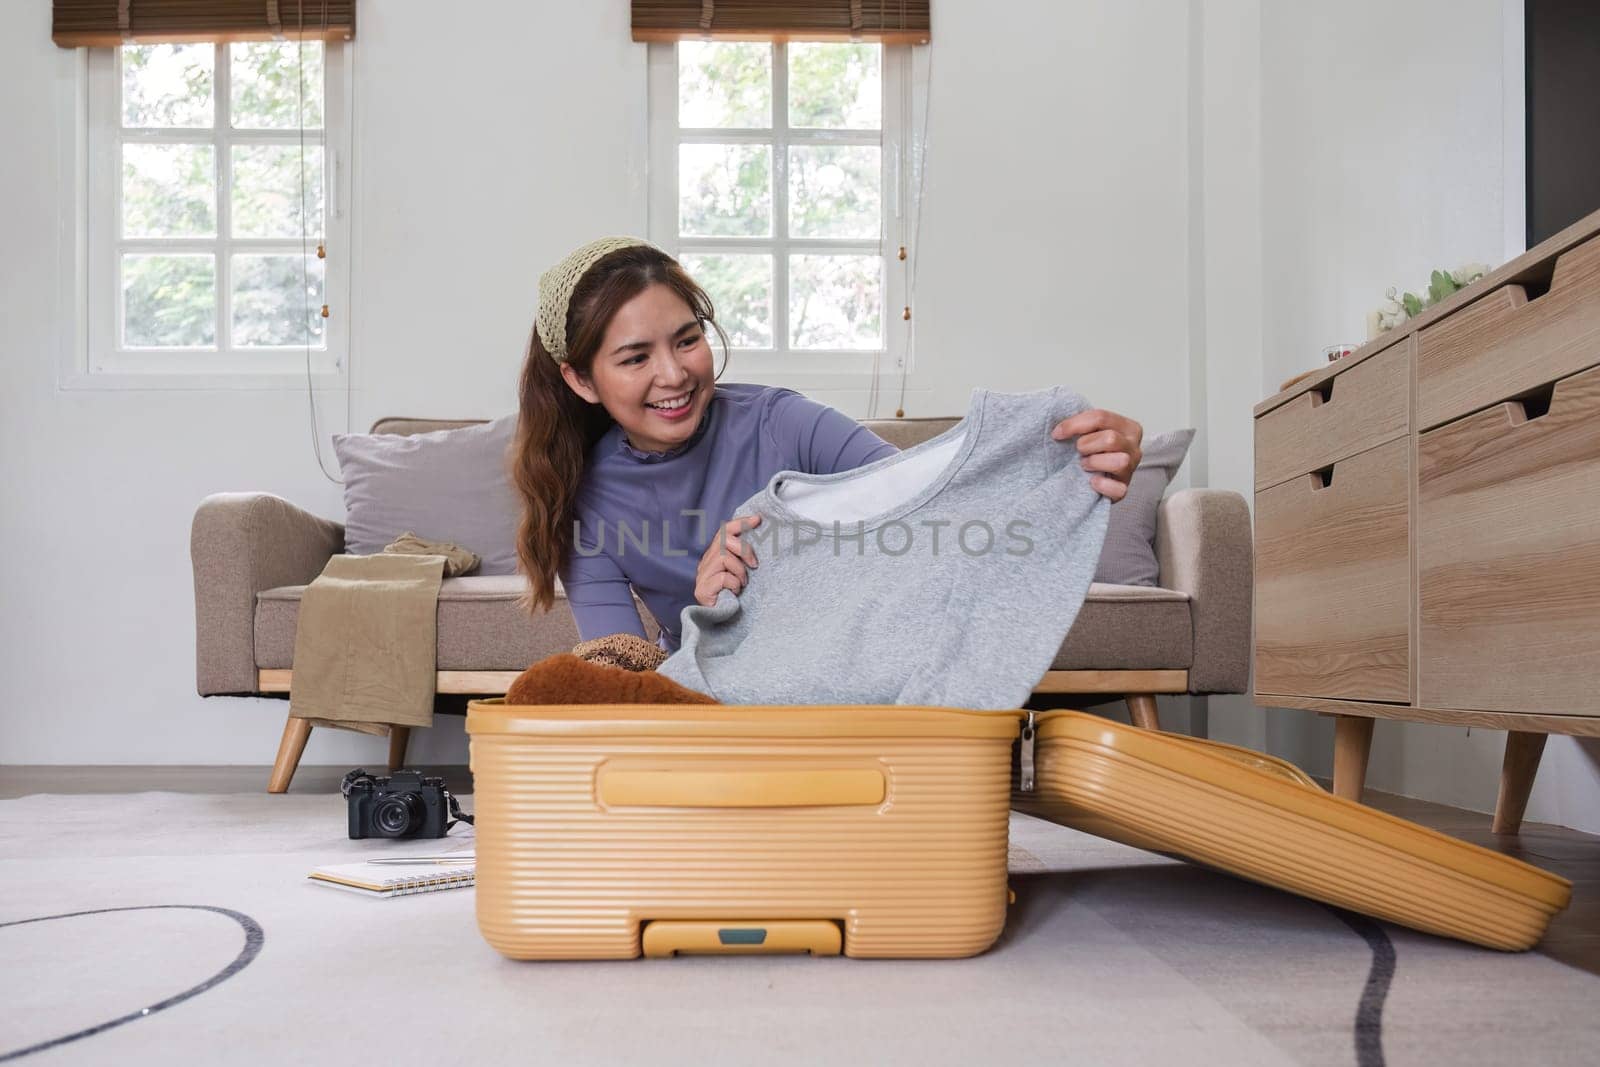 Attractive Asian woman packs her suitcase, packing her belongings, clothes and travel documents before going on vacation. Lifestyle concept.